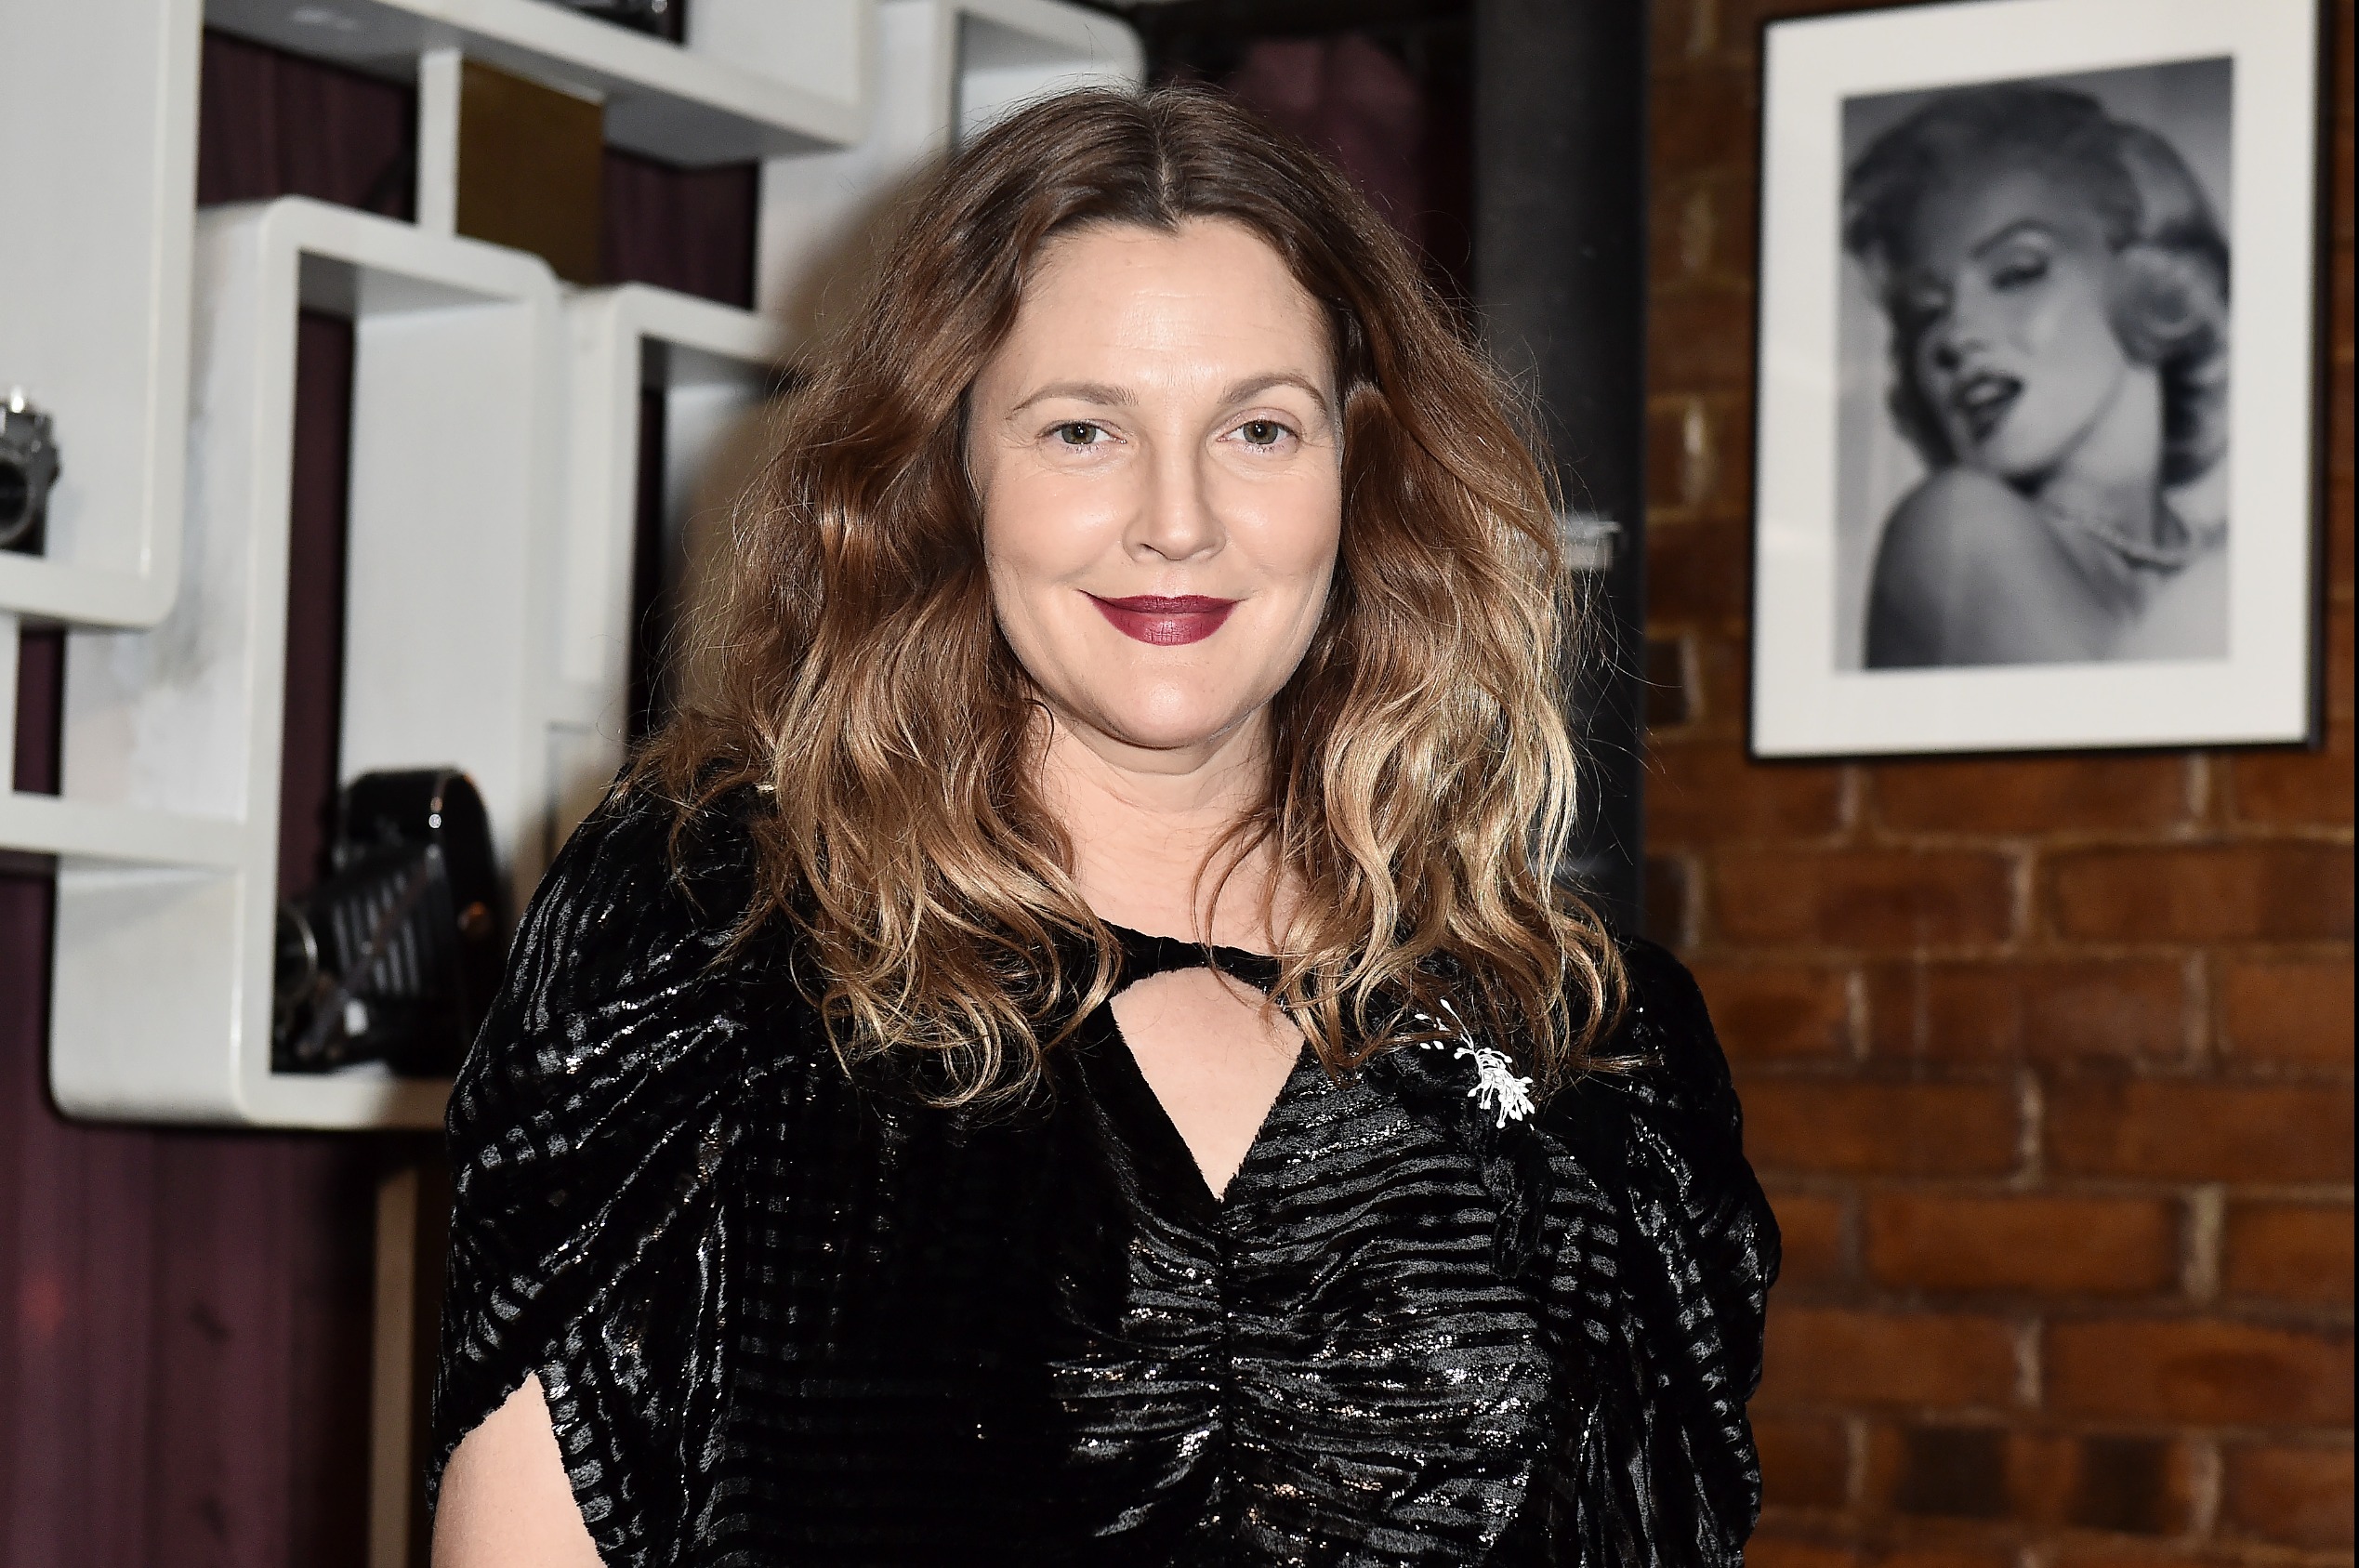 Drew Barrymore apologizes for Johnny Depp comments